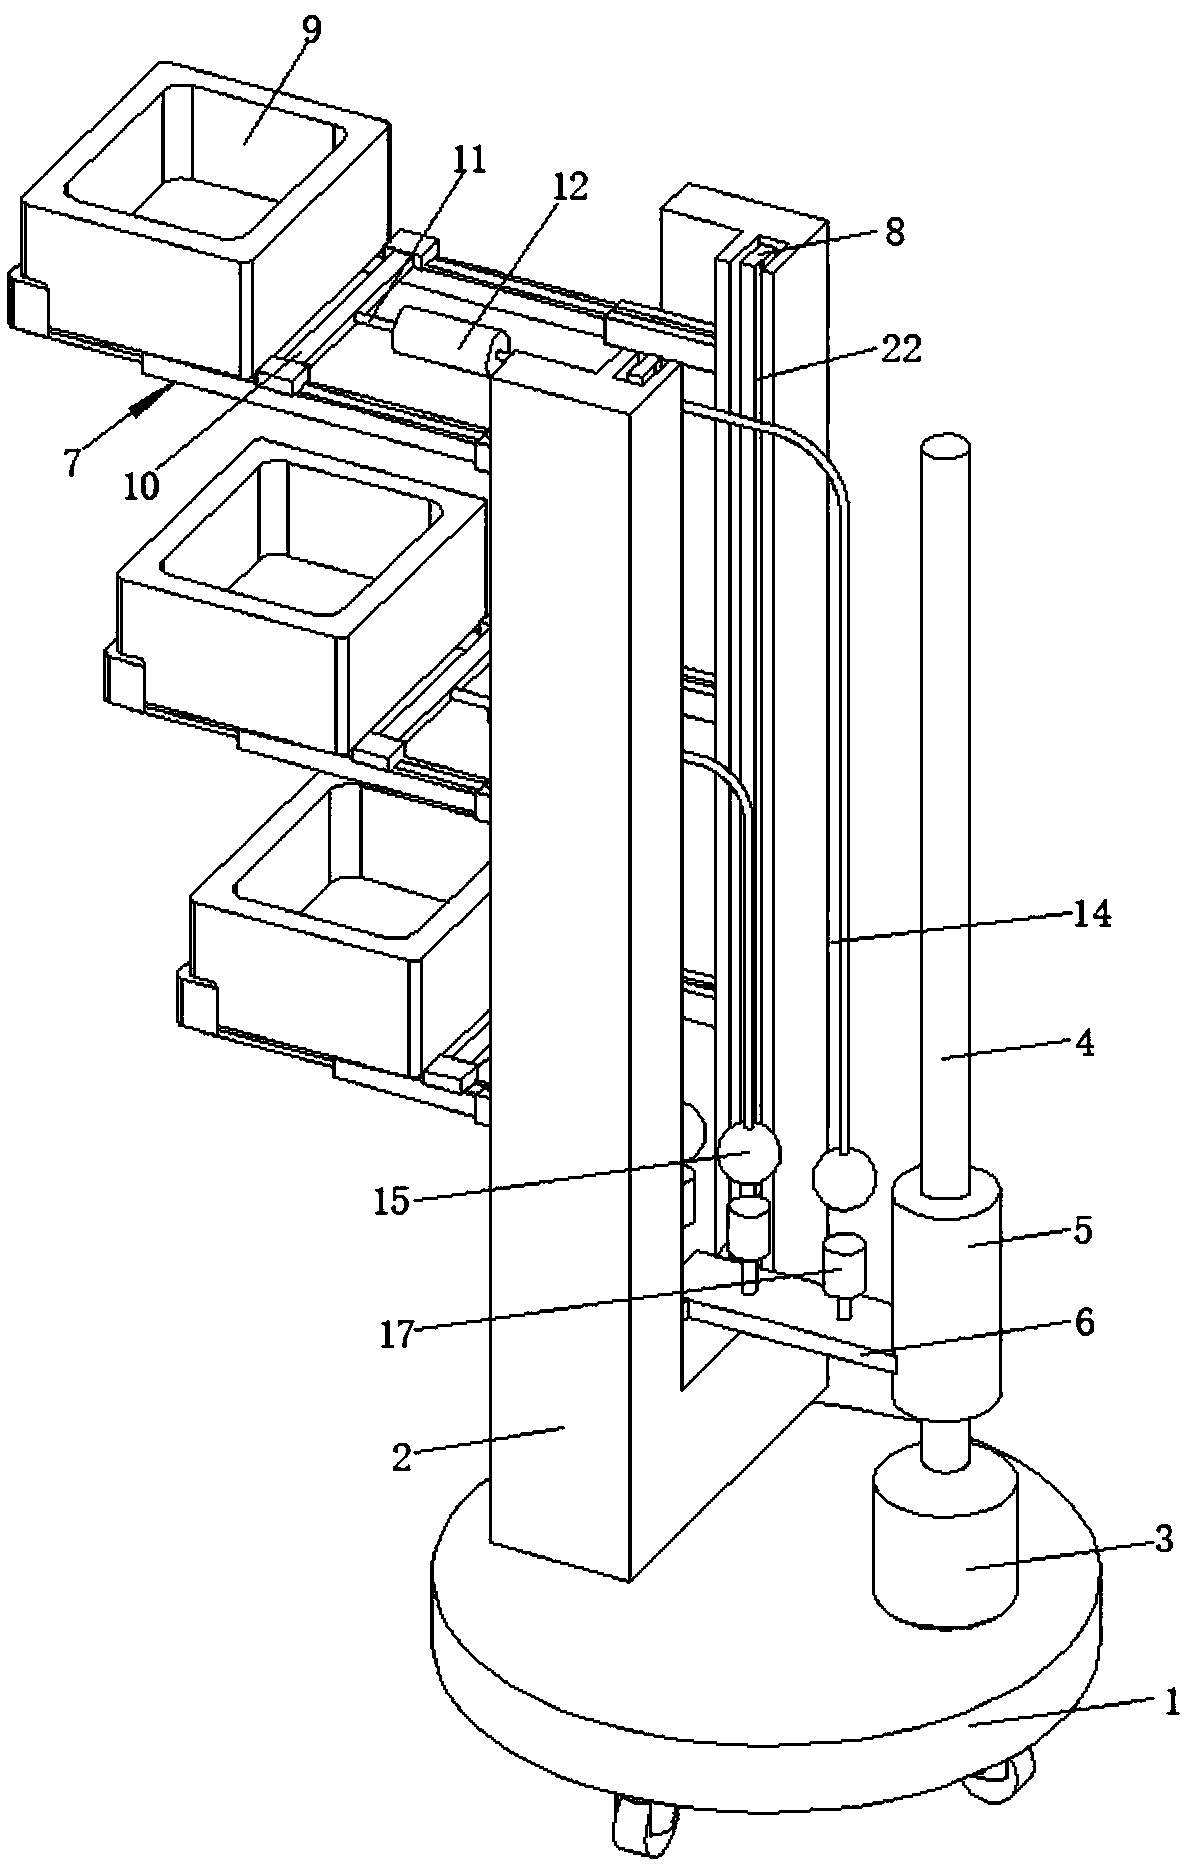 Transfer device for packaging of automobile components